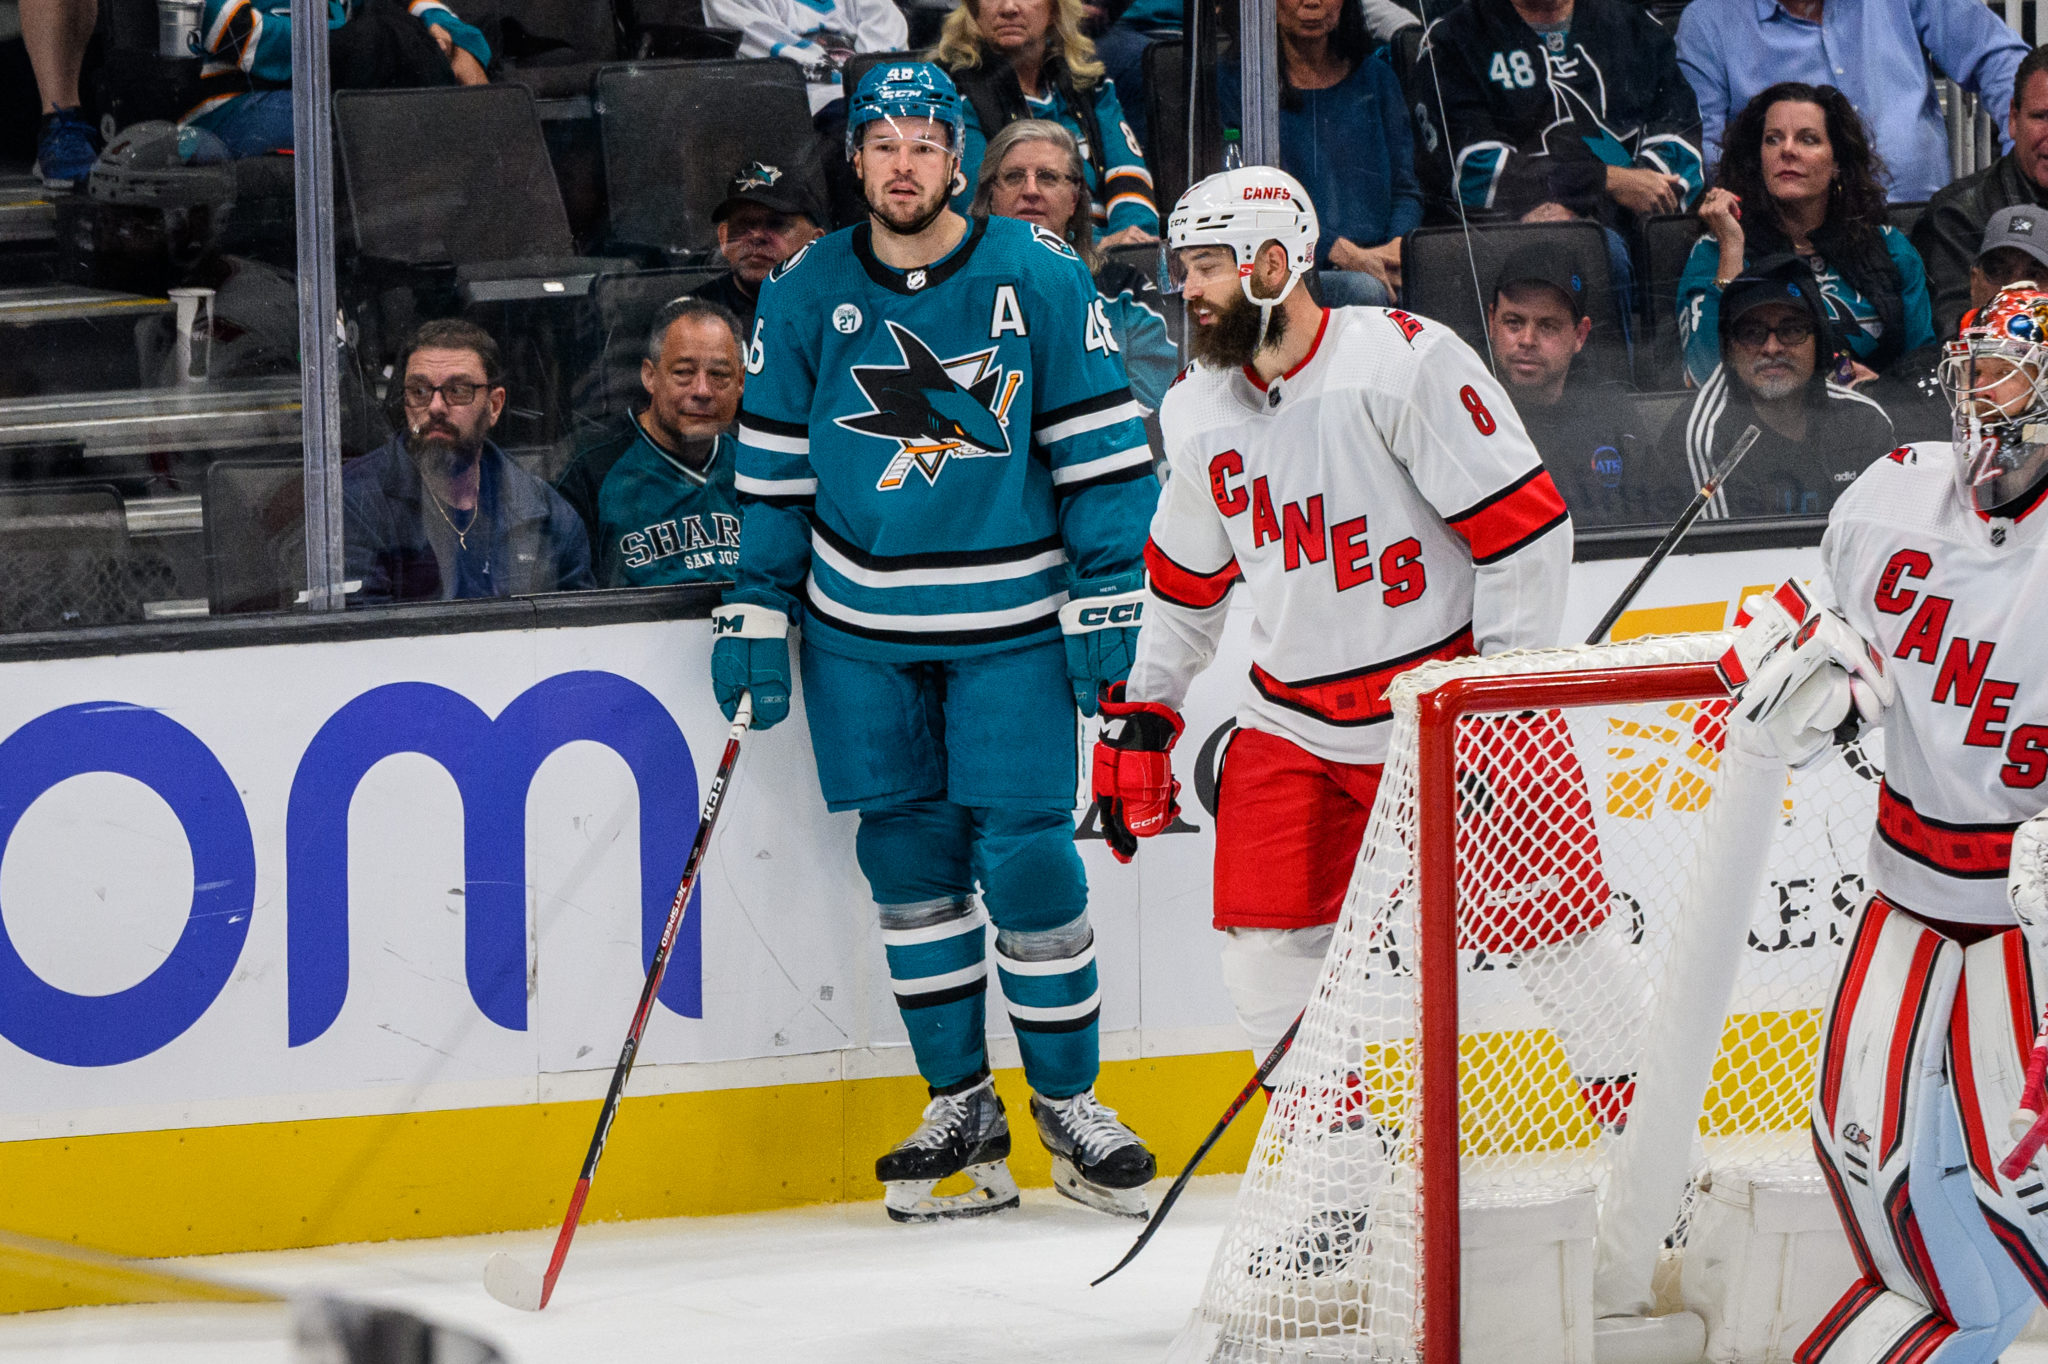 San Jose Sharks build fan engagement with analytics